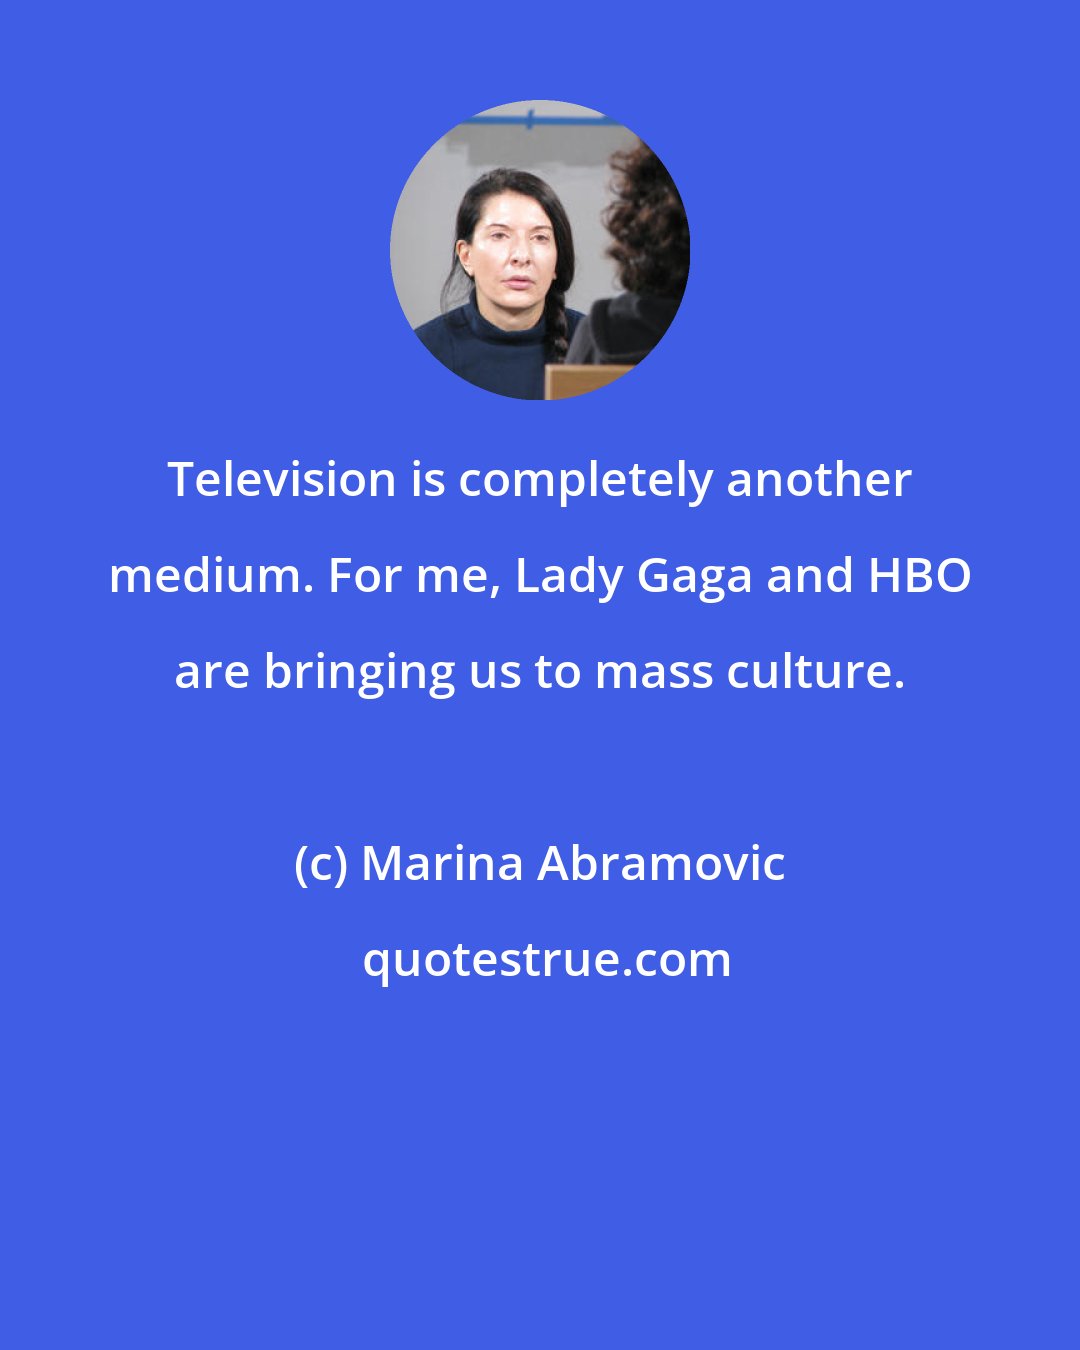 Marina Abramovic: Television is completely another medium. For me, Lady Gaga and HBO are bringing us to mass culture.